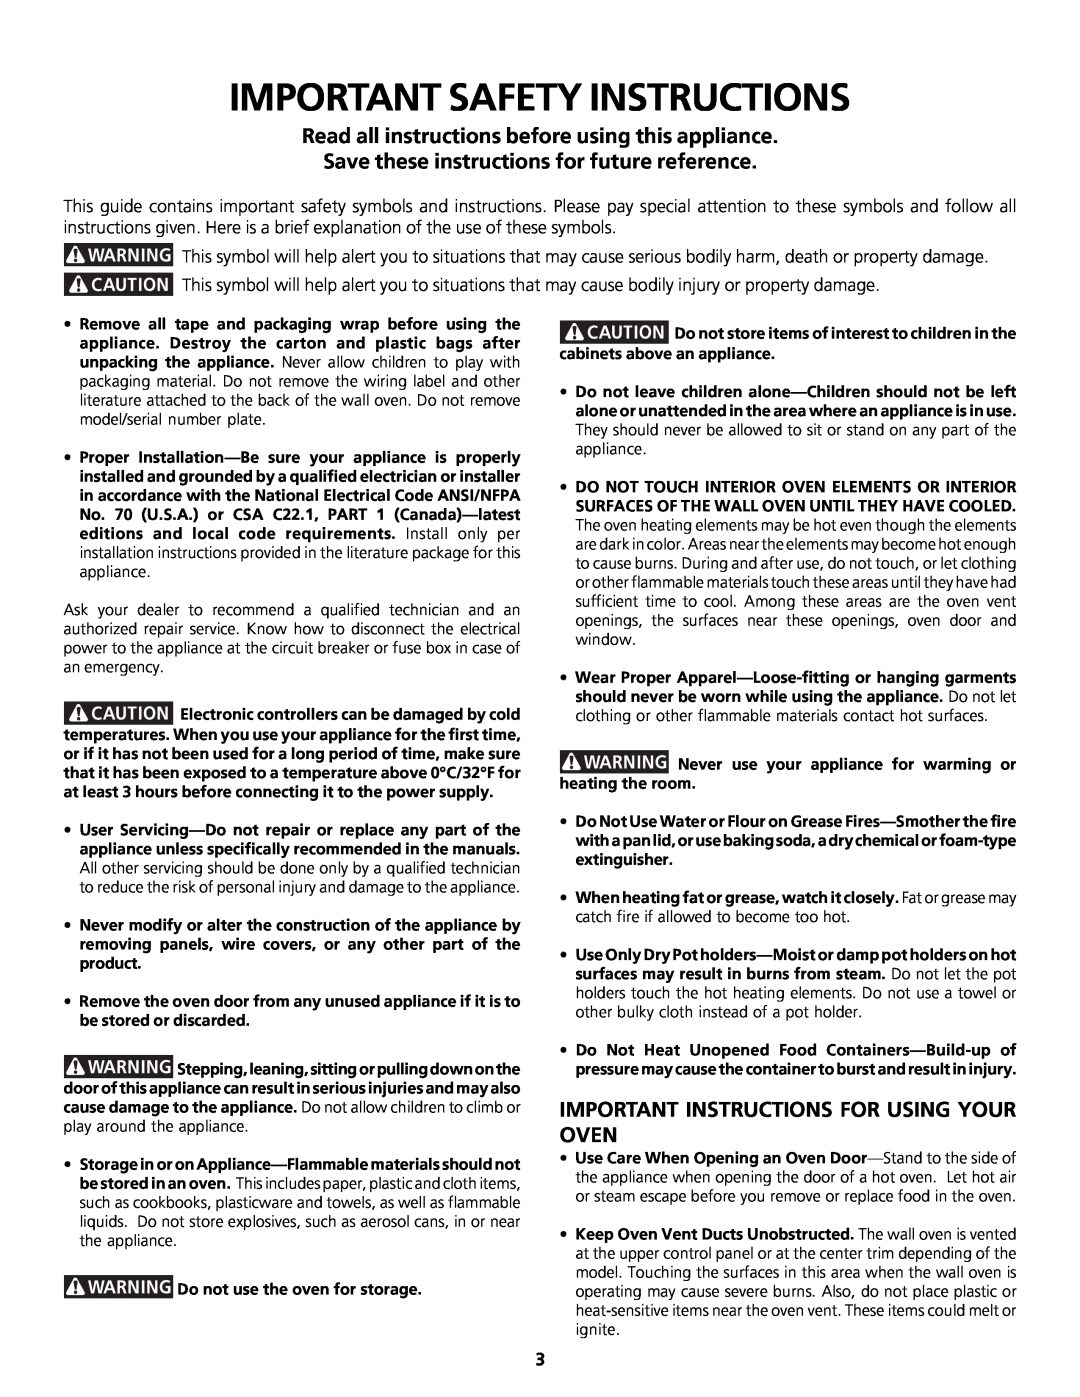 Frigidaire 318200920 Important Safety Instructions, Read all instructions before using this appliance 